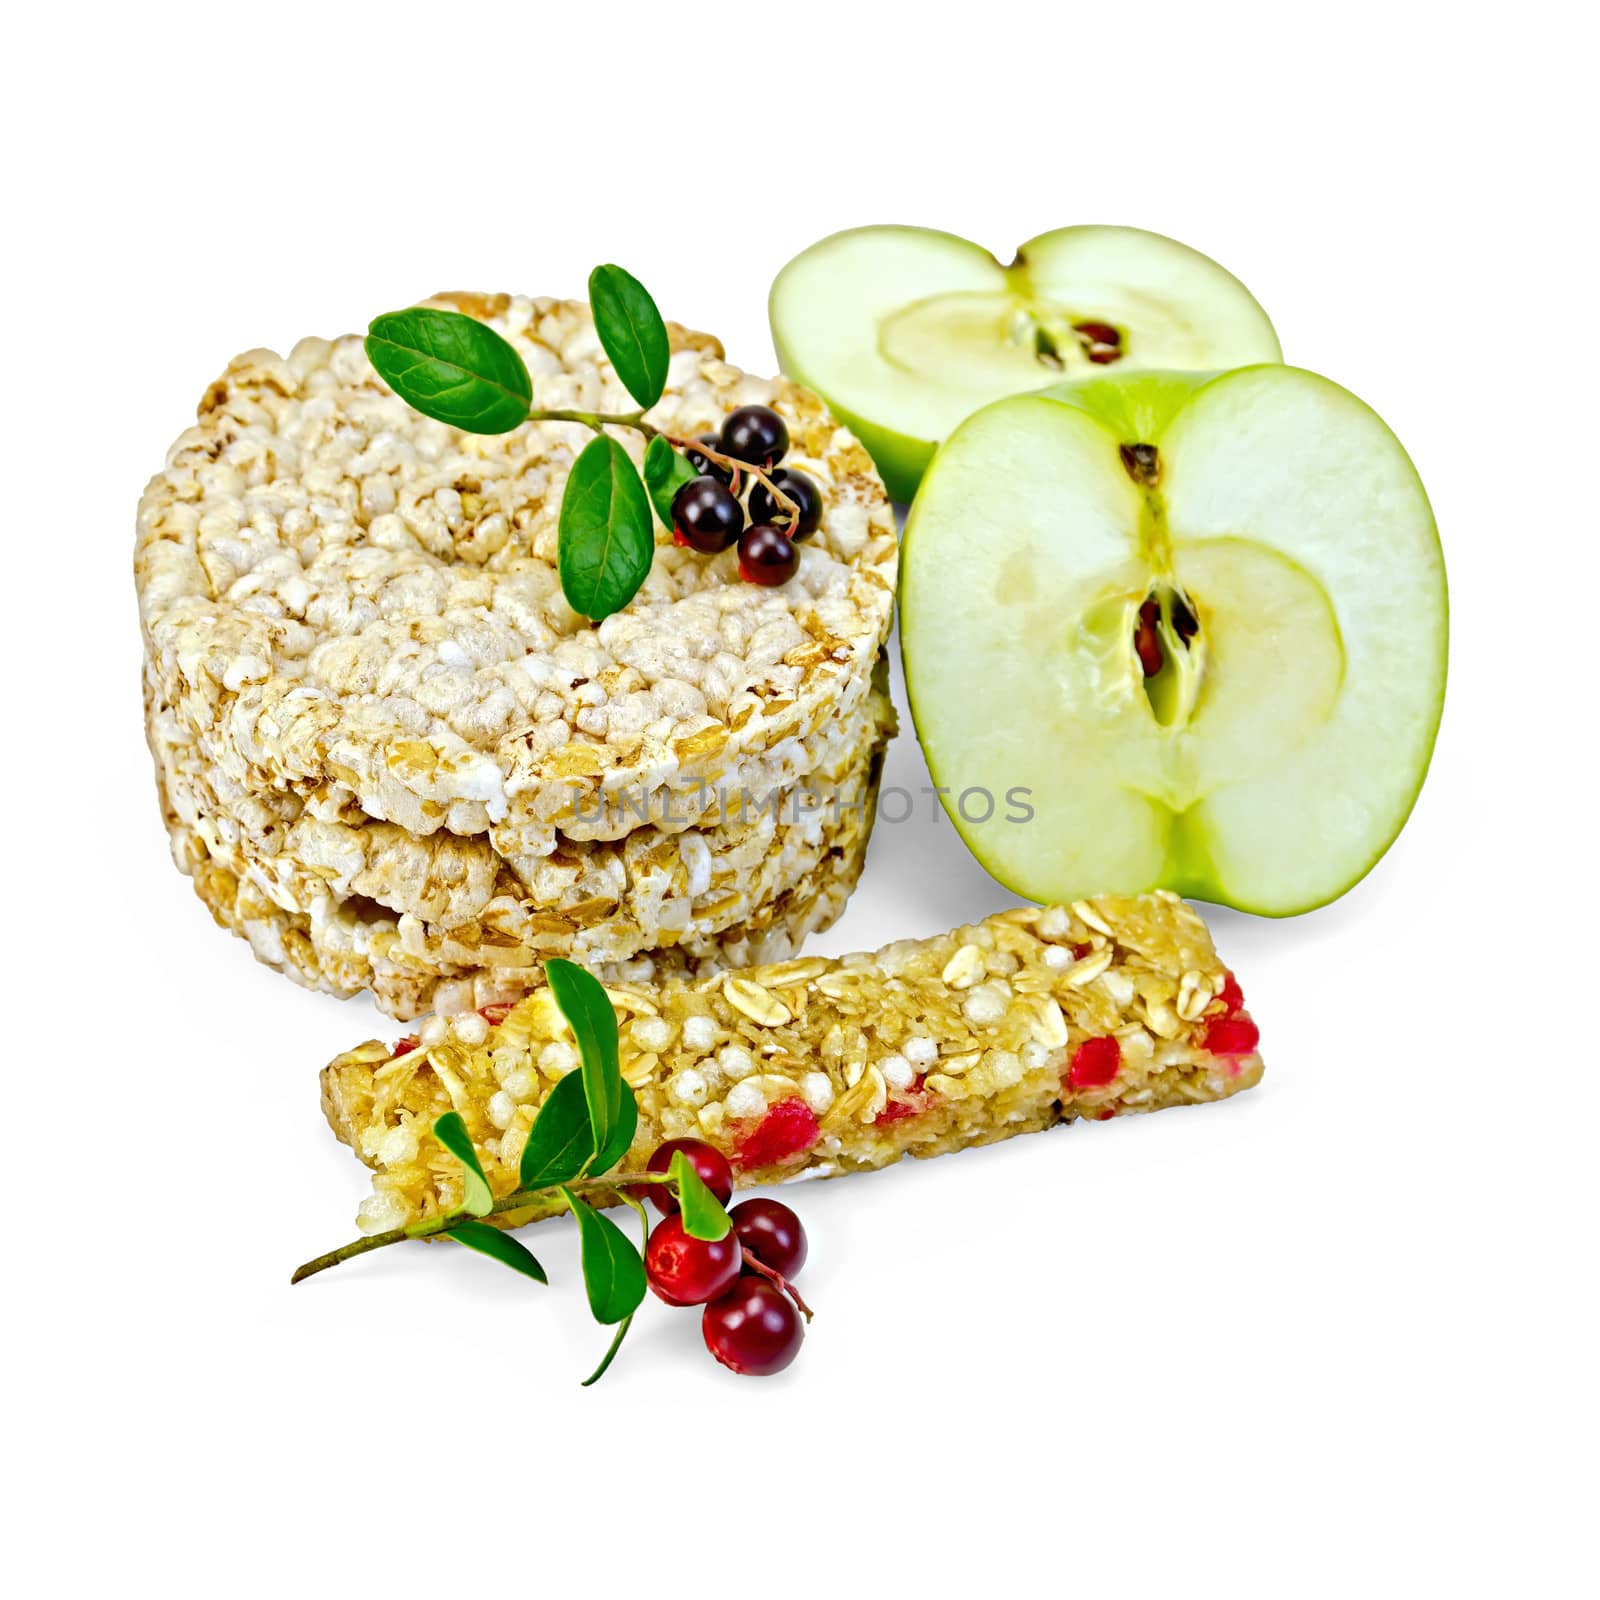 Granola bar, cereals stack crispbreads, sliced green apple, branches with leaves and berries lingonberries isolated on white background